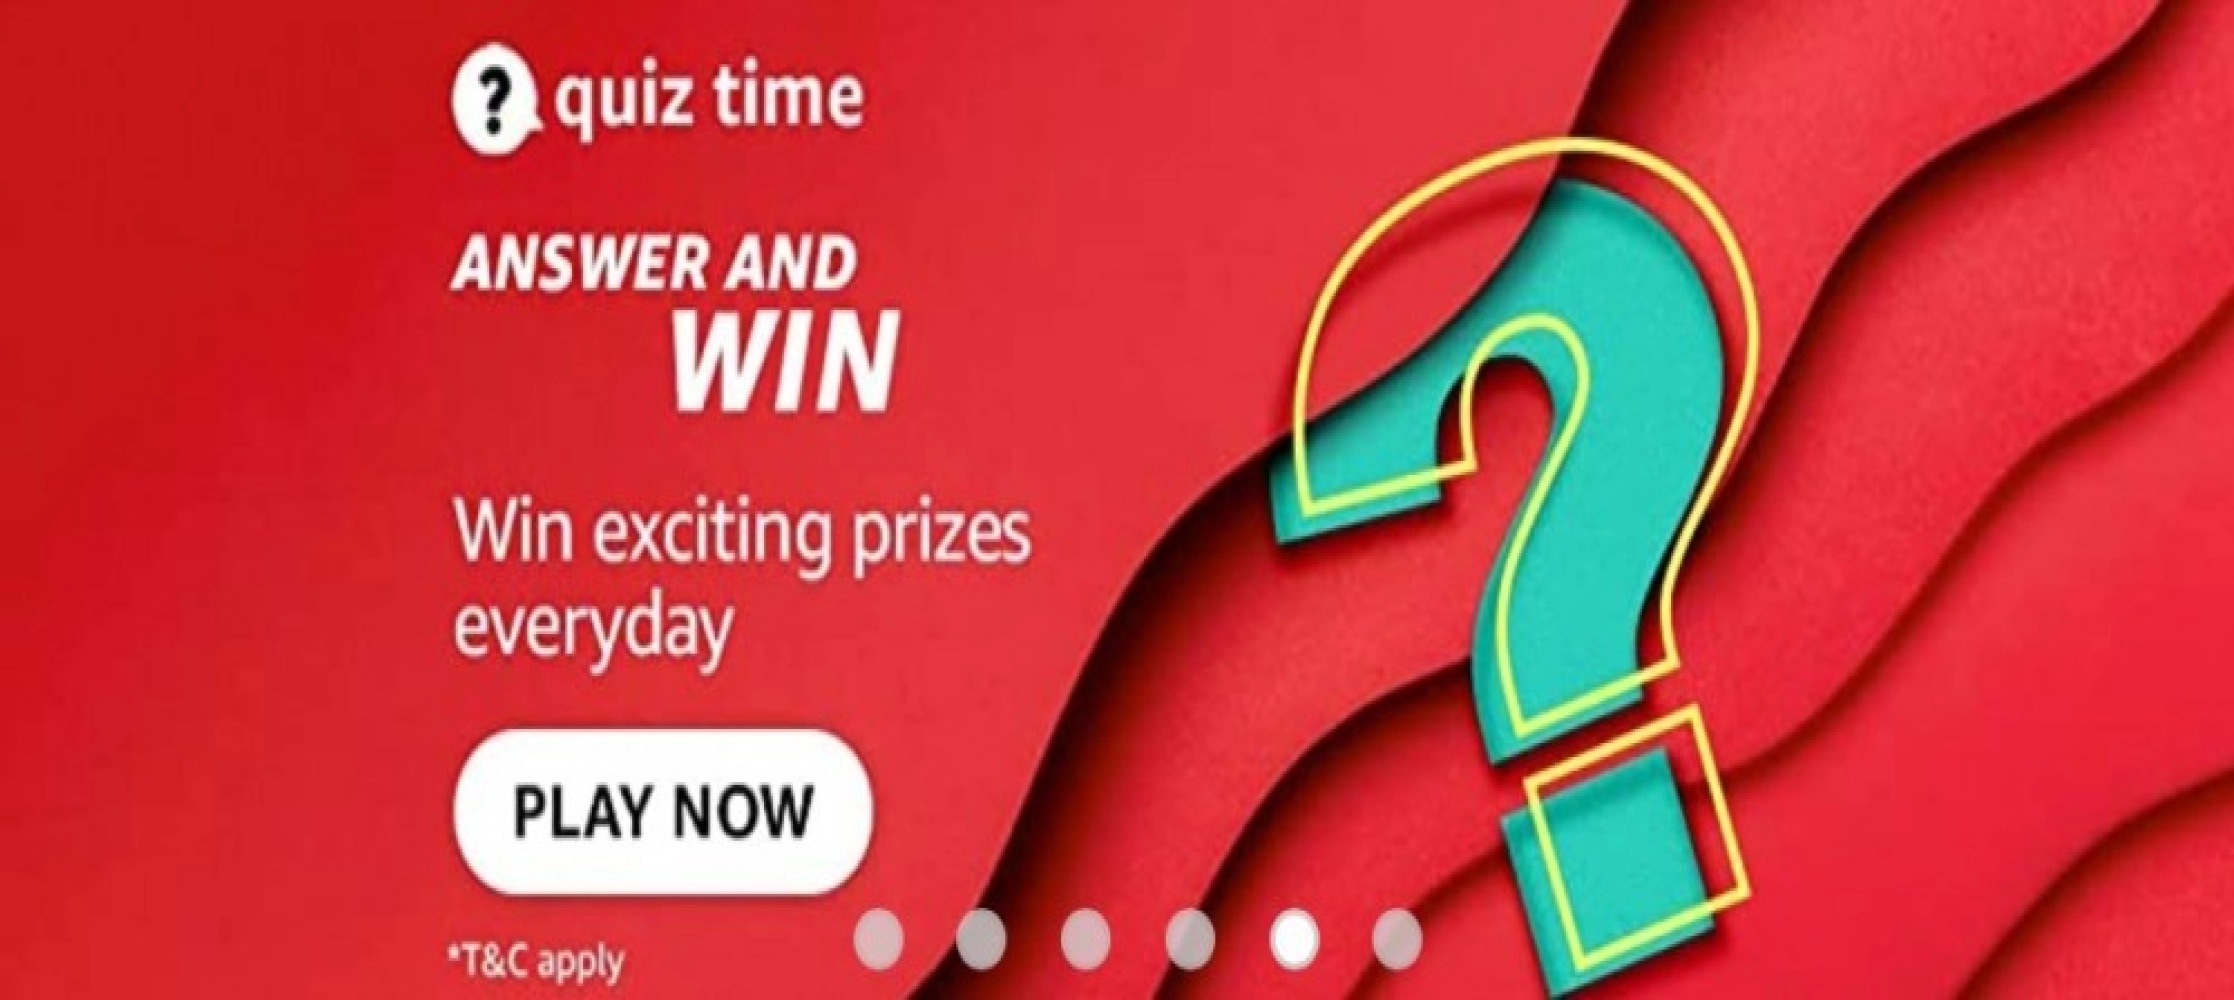 AMAZON QUIZ CONTEST: 29 MAY, 2022 - ANSWER TODAY FOR THE QUESTIONS AND GET A CHANCE TO WIN AMAZON PAY RS.40,000